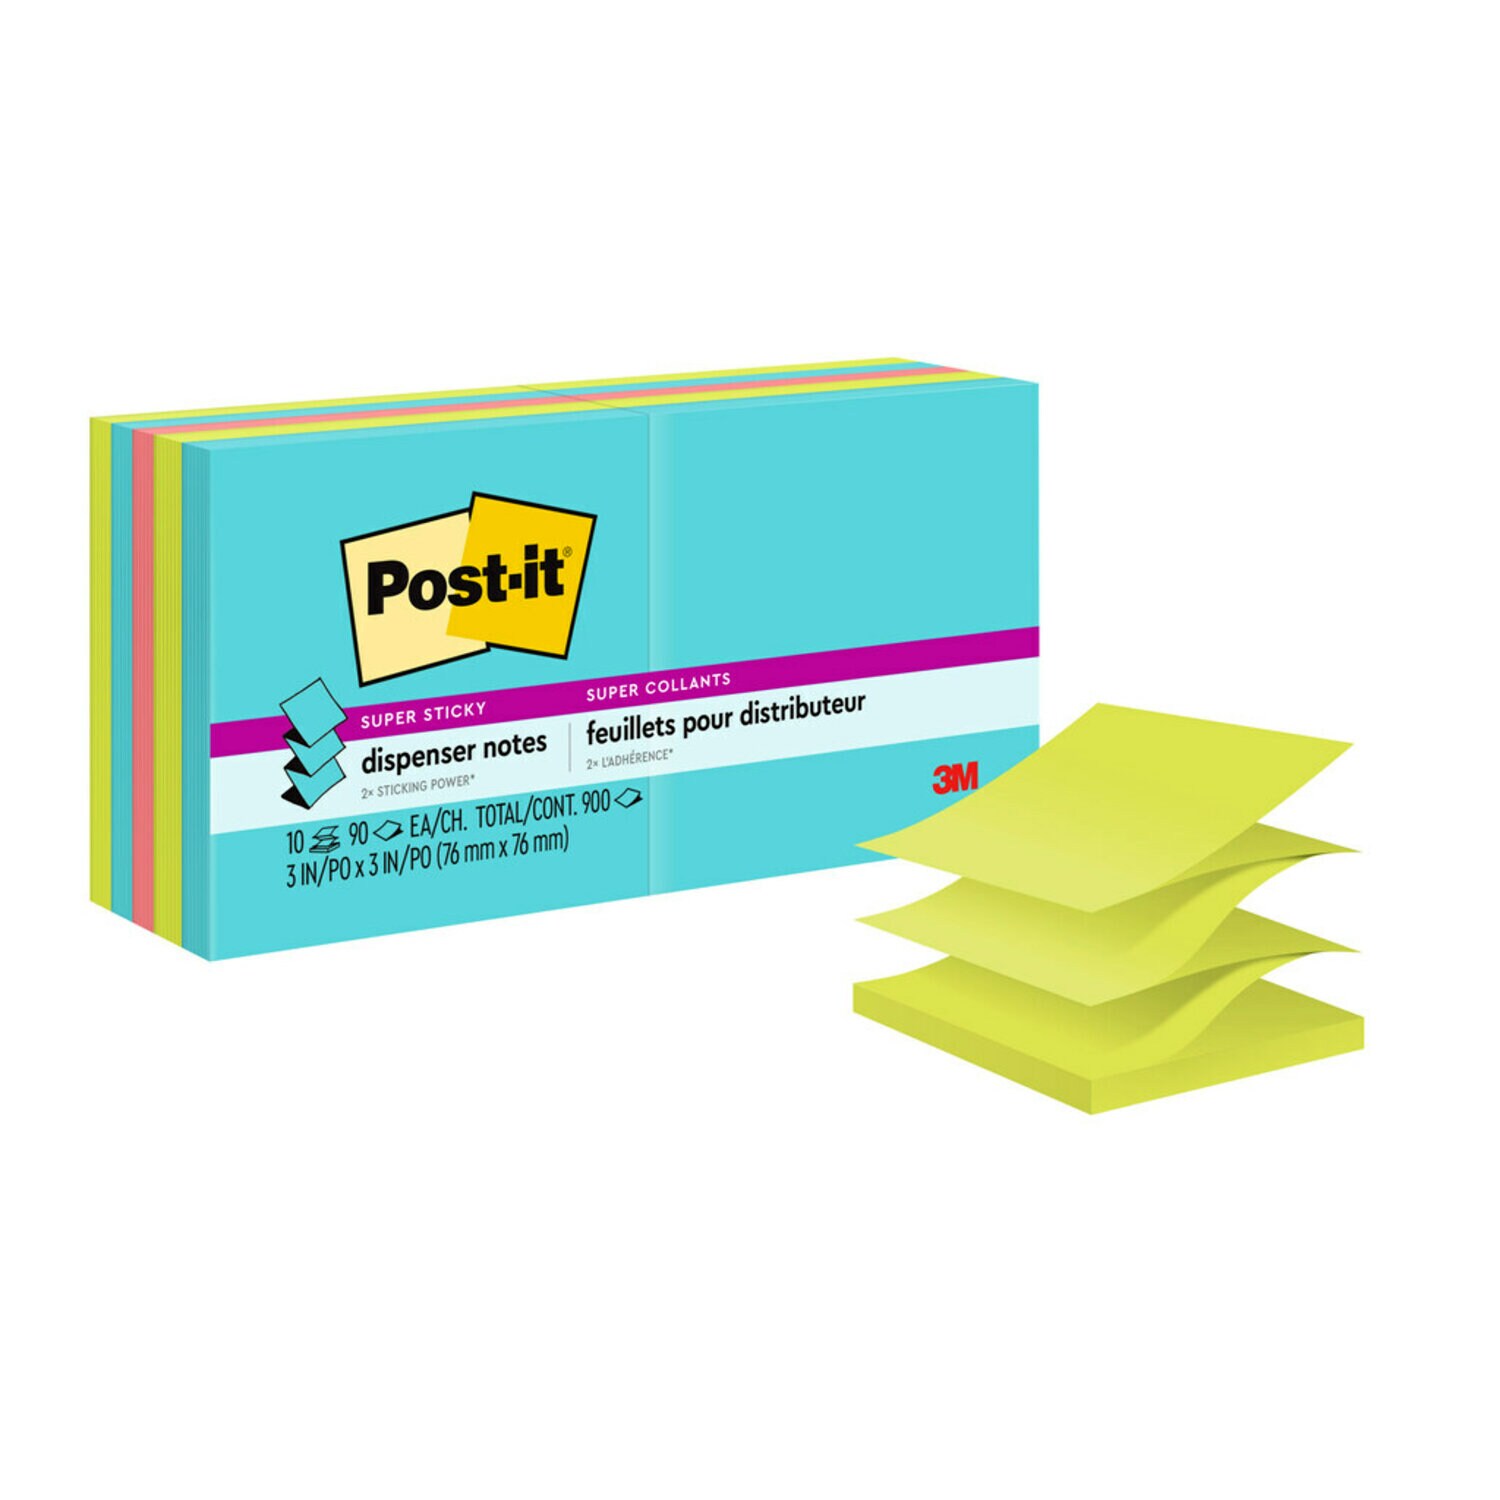 7100089132 - Post-it Super Sticky Dispenser Pop-up Notes R330-10SSMIA, 3 in x 3 in (76 mm x 76 mm), Supernova Neons, 10 Pads/Pack,90 Sheets/Pad